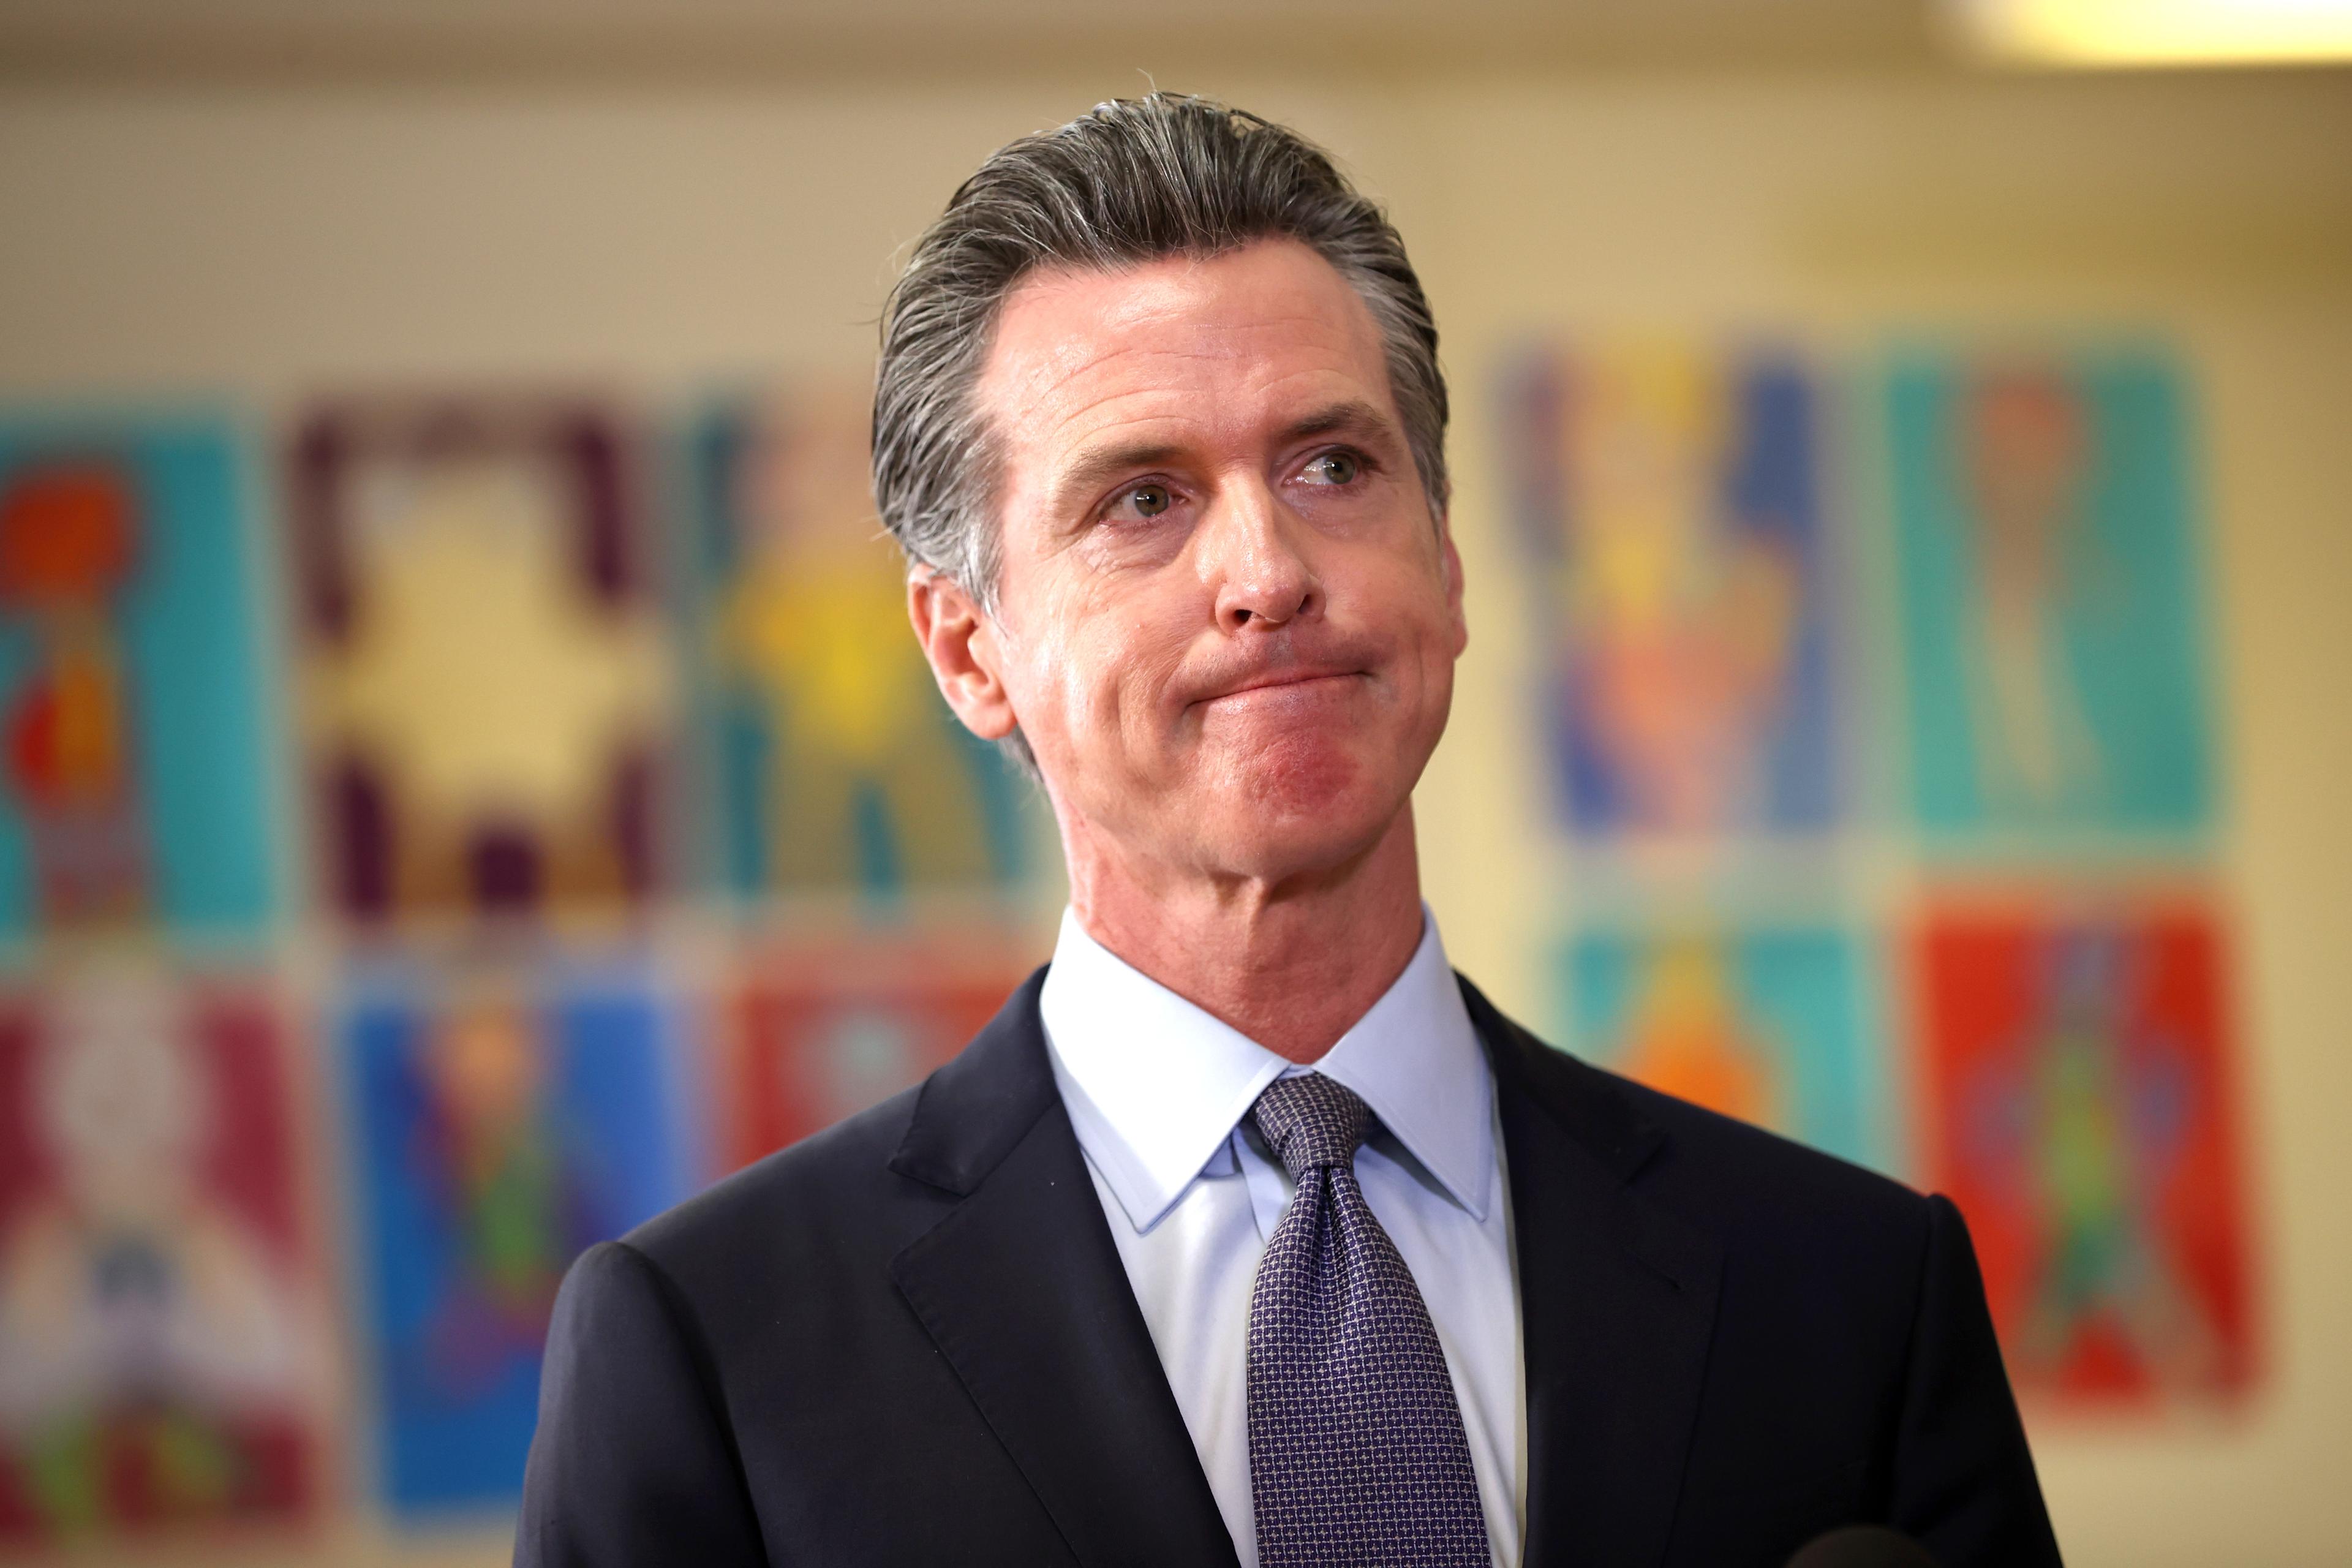 Of Course Overspending Slammed California Into Massive Deficit